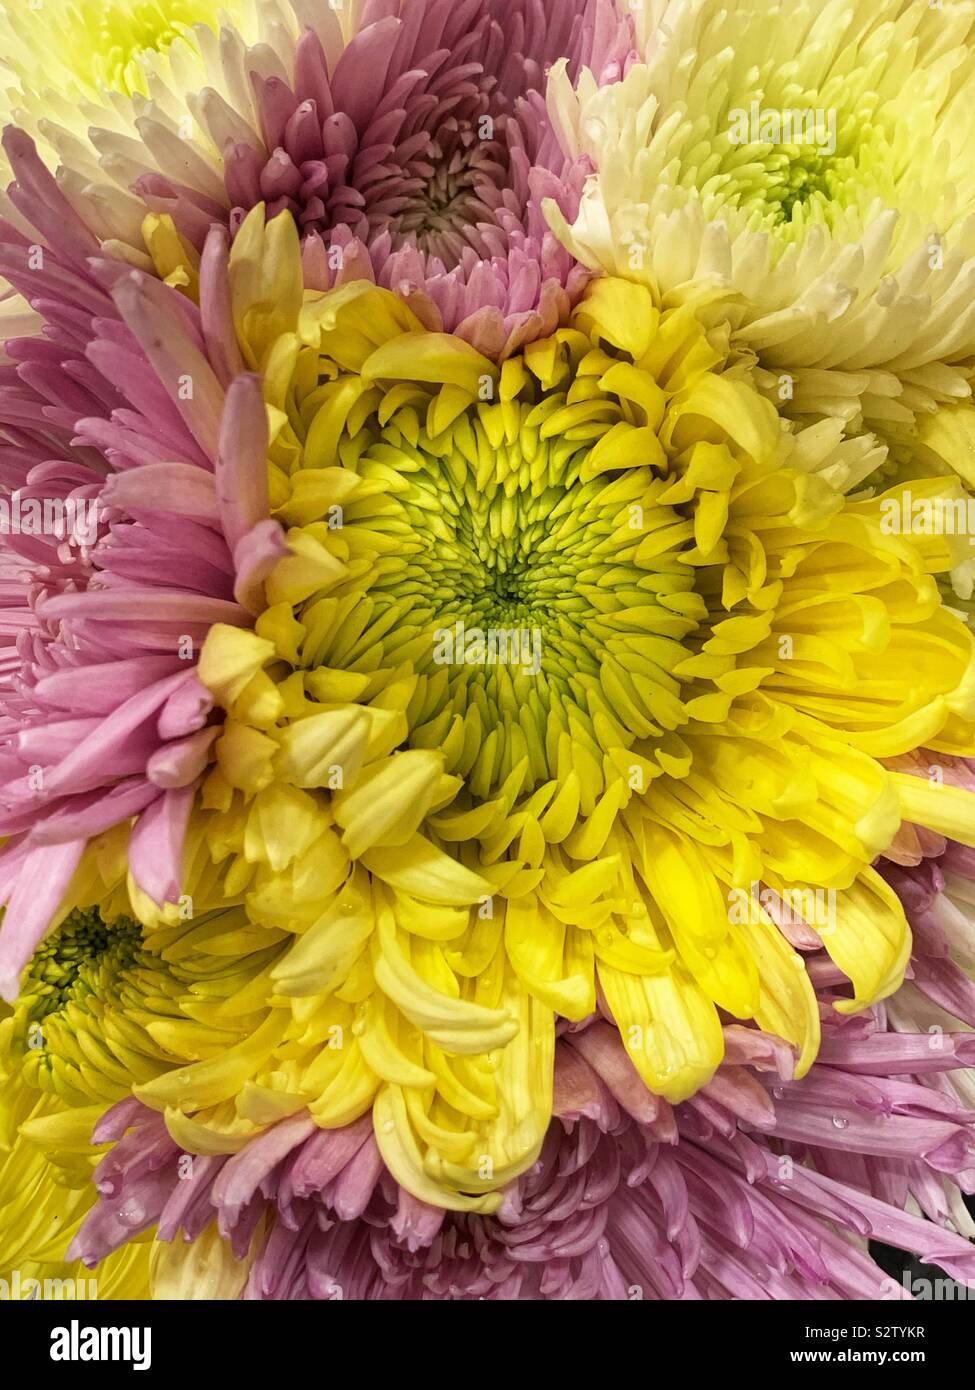 Beautiful yellow chrysanthemum surrounded by pink chrysanthemums in full bloom. Stock Photo